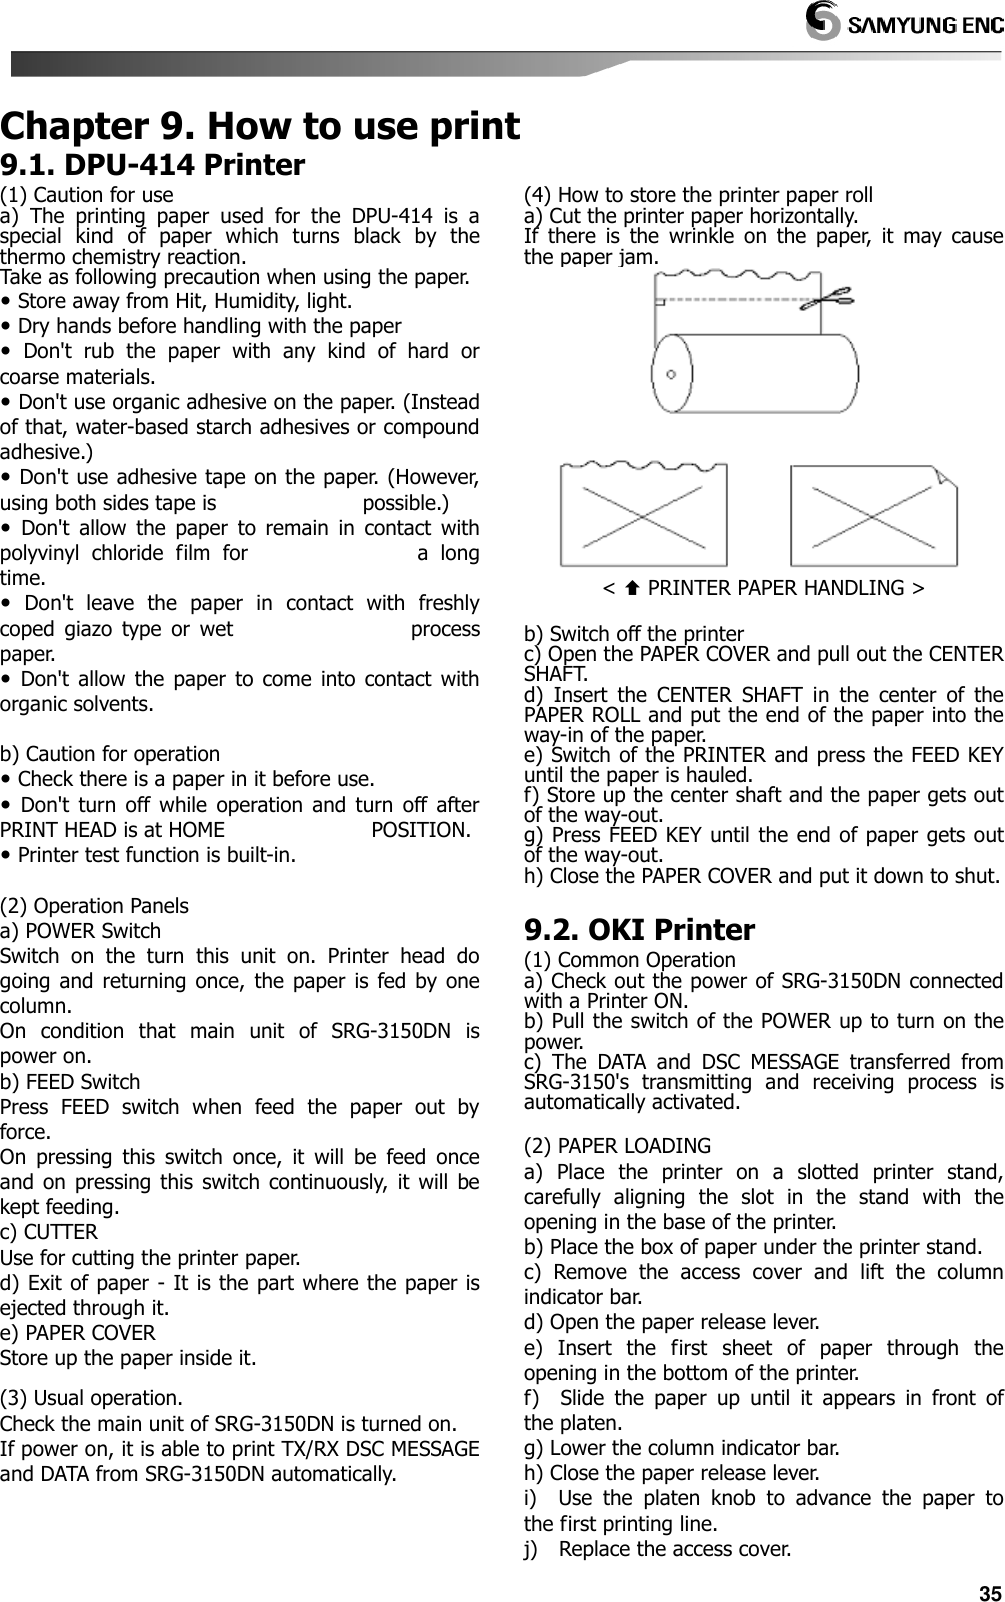   35 Chapter 9. How to use print9.1. DPU-414 Printer (1) Caution for use a)  The  printing  paper  used  for  the  DPU-414  is  a special  kind  of  paper  which  turns  black  by  the thermo chemistry reaction. Take as following precaution when using the paper.  Store away from Hit, Humidity, light.  Dry hands before handling with the paper   Don&apos;t  rub  the  paper  with  any  kind  of  hard  or coarse materials.  Don&apos;t use organic adhesive on the paper. (Instead of that, water-based starch adhesives or compound adhesive.)  Don&apos;t use adhesive tape on the paper. (However, using both sides tape is                            possible.)   Don&apos;t  allow  the  paper  to  remain  in  contact  with polyvinyl  chloride  film  for                            a  long time.   Don&apos;t  leave  the  paper  in  contact  with  freshly coped  giazo  type  or  wet                                  process paper.   Don&apos;t  allow  the  paper  to come  into  contact  with organic solvents.  b) Caution for operation  Check there is a paper in it before use.   Don&apos;t  turn  off while  operation  and  turn  off  after PRINT HEAD is at HOME                            POSITION.  Printer test function is built-in.  (2) Operation Panels a) POWER Switch Switch  on  the  turn  this  unit  on.  Printer  head  do going  and  returning  once,  the  paper  is  fed  by one column. On  condition  that  main  unit  of  SRG-3150DN  is power on. b) FEED Switch Press  FEED  switch  when  feed  the  paper  out  by force.   On  pressing  this  switch  once,  it  will  be  feed  once and  on pressing  this  switch  continuously,  it  will  be kept feeding. c) CUTTER Use for cutting the printer paper. d) Exit of paper - It is the part where the paper is ejected through it. e) PAPER COVER Store up the paper inside it.  (3) Usual operation. Check the main unit of SRG-3150DN is turned on. If power on, it is able to print TX/RX DSC MESSAGE and DATA from SRG-3150DN automatically.    (4) How to store the printer paper roll a) Cut the printer paper horizontally. If  there  is  the  wrinkle  on  the  paper,  it  may  cause the paper jam.  &lt;  PRINTER PAPER HANDLING &gt;  b) Switch off the printer c) Open the PAPER COVER and pull out the CENTER SHAFT. d)  Insert  the  CENTER  SHAFT  in  the  center  of  the PAPER ROLL and put the end of the paper into the way-in of the paper. e) Switch of the PRINTER and press the FEED KEY until the paper is hauled. f) Store up the center shaft and the paper gets out of the way-out. g) Press FEED KEY until the end of paper gets out of the way-out. h) Close the PAPER COVER and put it down to shut.  9.2. OKI Printer (1) Common Operation   a) Check out the power of SRG-3150DN connected with a Printer ON. b) Pull the switch of the POWER up to turn on the power. c)  The  DATA  and  DSC  MESSAGE  transferred  from SRG-3150&apos;s  transmitting  and  receiving  process  is automatically activated.  (2) PAPER LOADING a)  Place  the  printer  on  a  slotted  printer  stand, carefully  aligning  the  slot  in  the  stand  with  the opening in the base of the printer. b) Place the box of paper under the printer stand. c)  Remove  the  access  cover  and  lift  the  column indicator bar. d) Open the paper release lever. e)  Insert  the  first  sheet  of  paper  through  the opening in the bottom of the printer. f)    Slide  the  paper  up  until  it  appears  in  front  of the platen. g) Lower the column indicator bar. h) Close the paper release lever. i)    Use  the  platen  knob  to  advance  the  paper  to the first printing line. j)    Replace the access cover. 